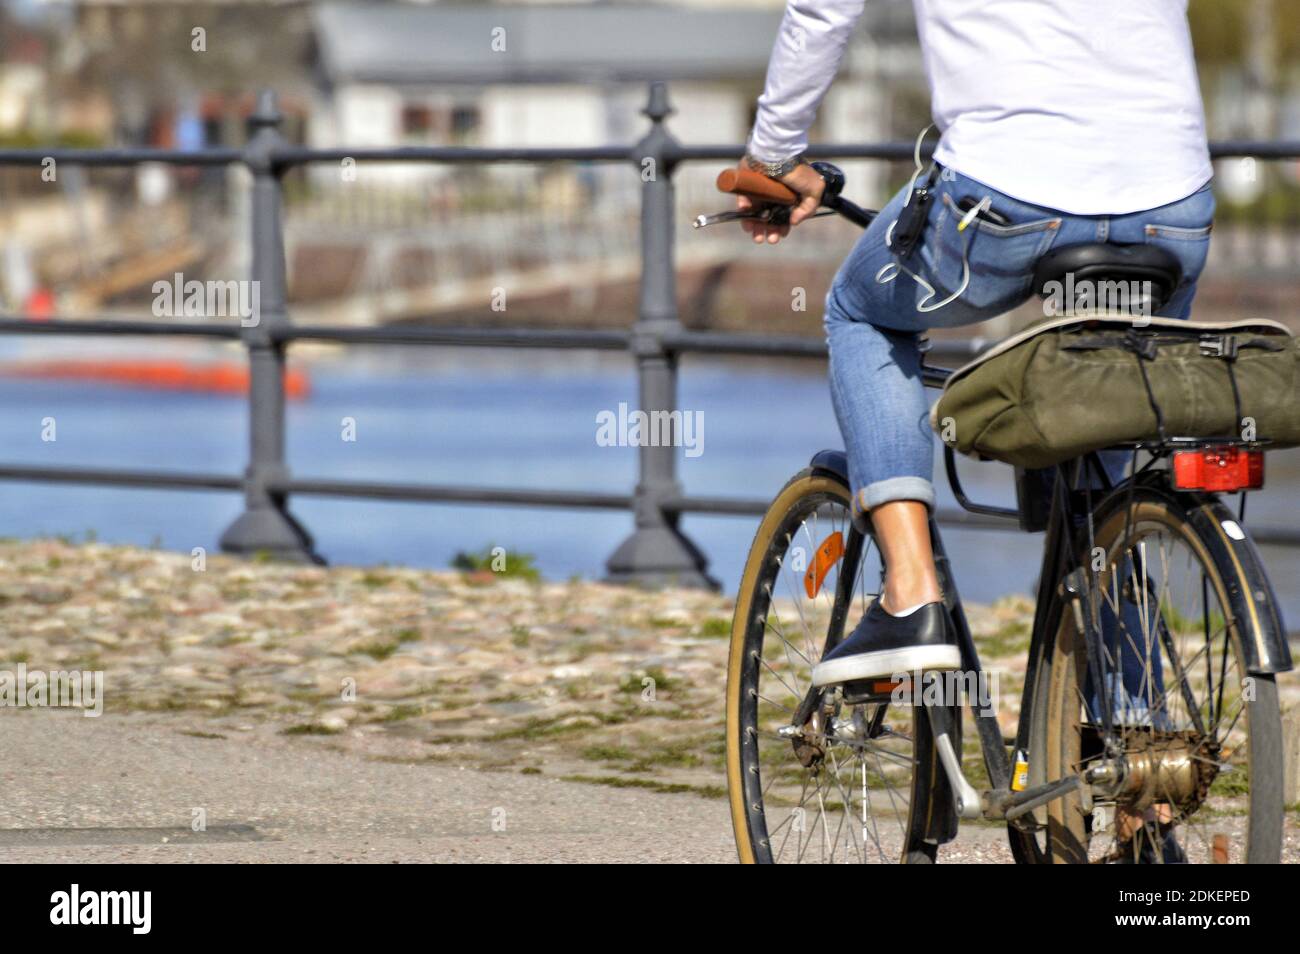 Low Section Of Man Riding Bicycle On Road In City Stock Photo